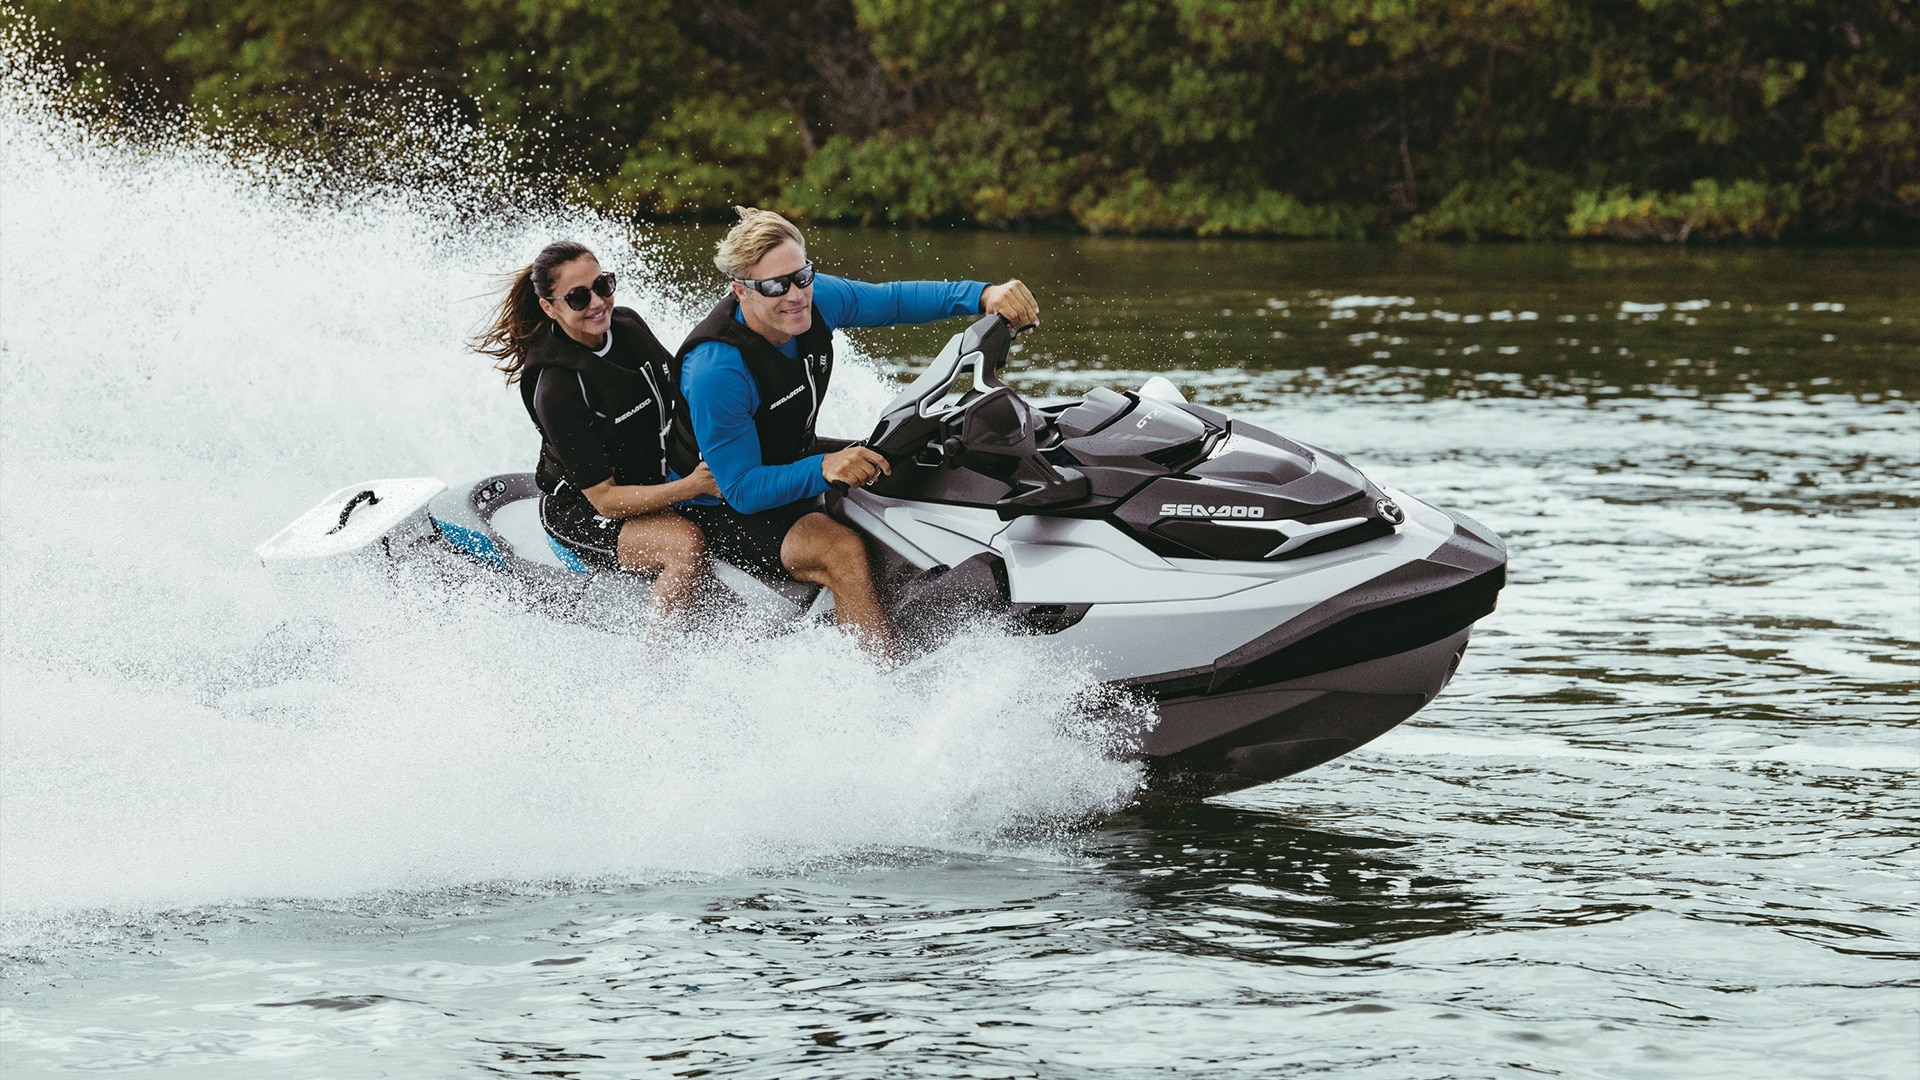 How do you safely ride a Sea-Doo with a passenger?